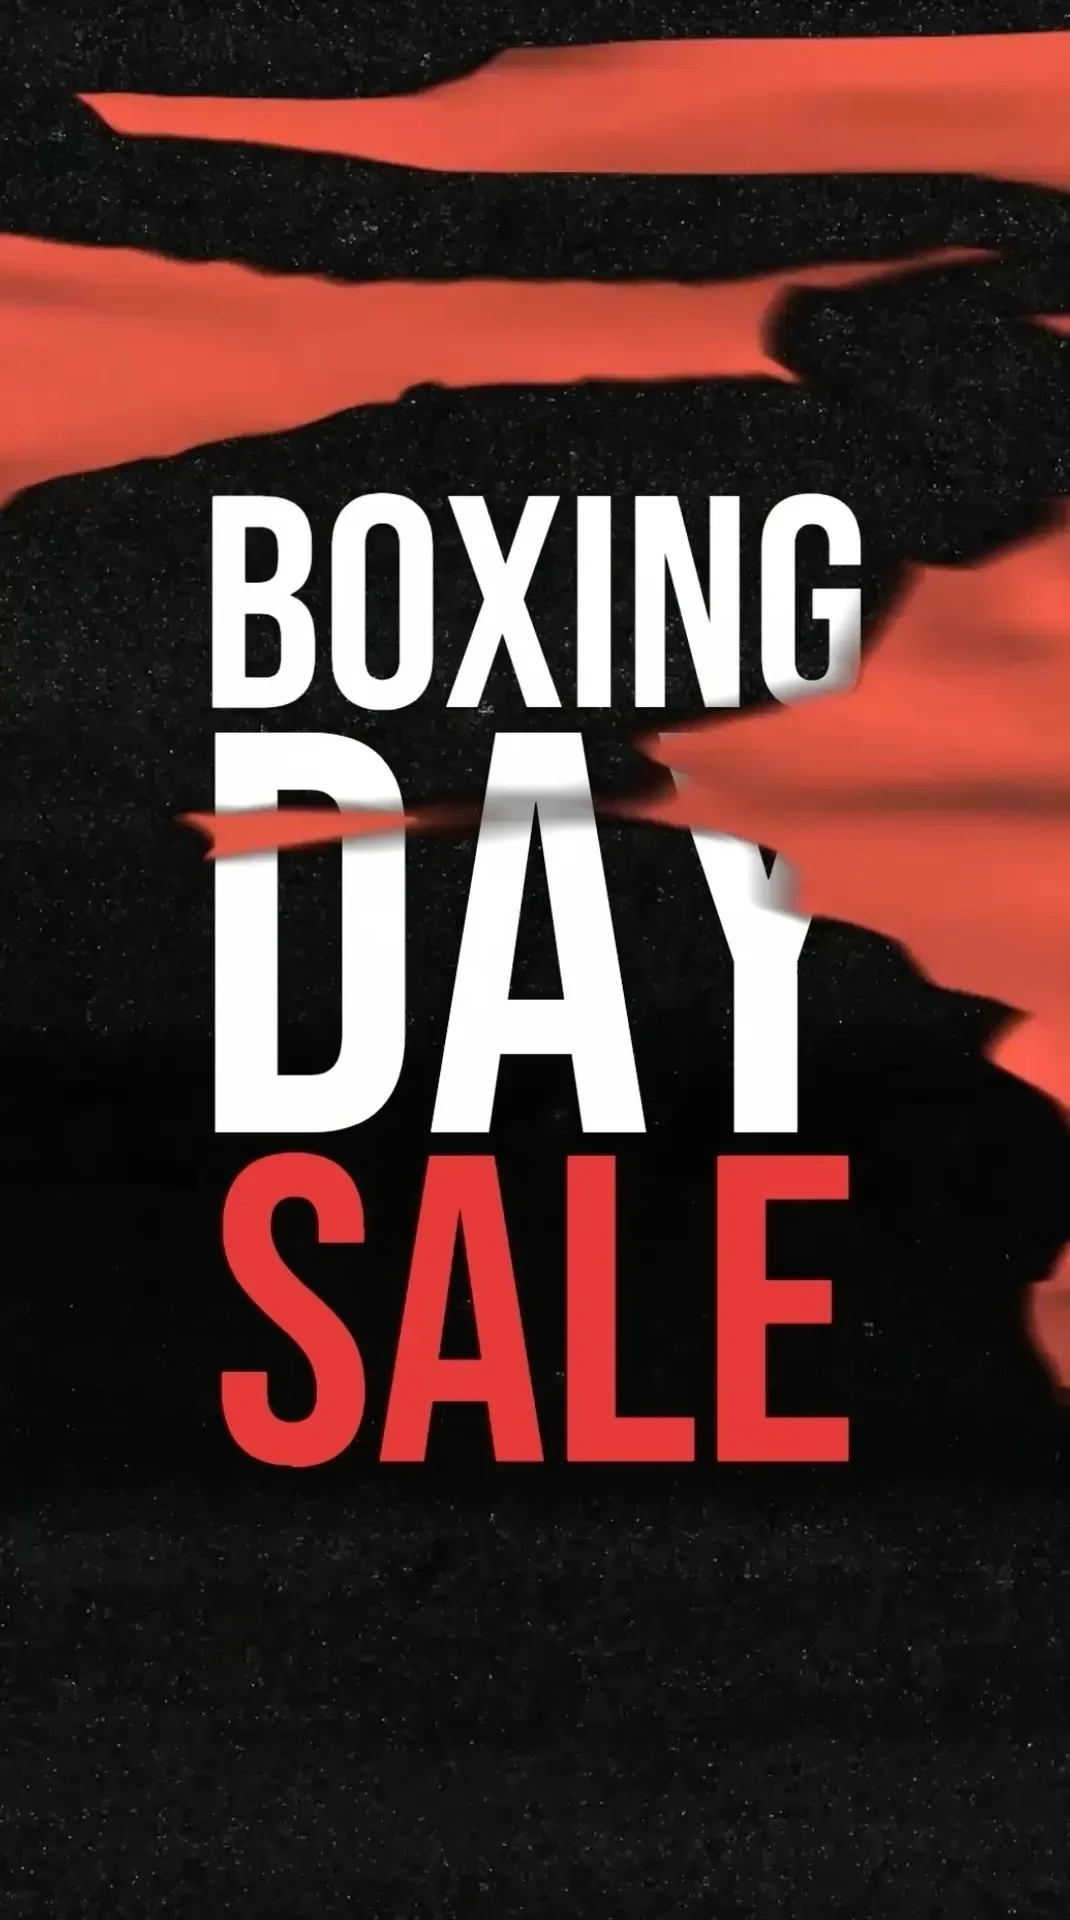 Boxing Day sale Instagram ad Boxing Day sale Instagram ad